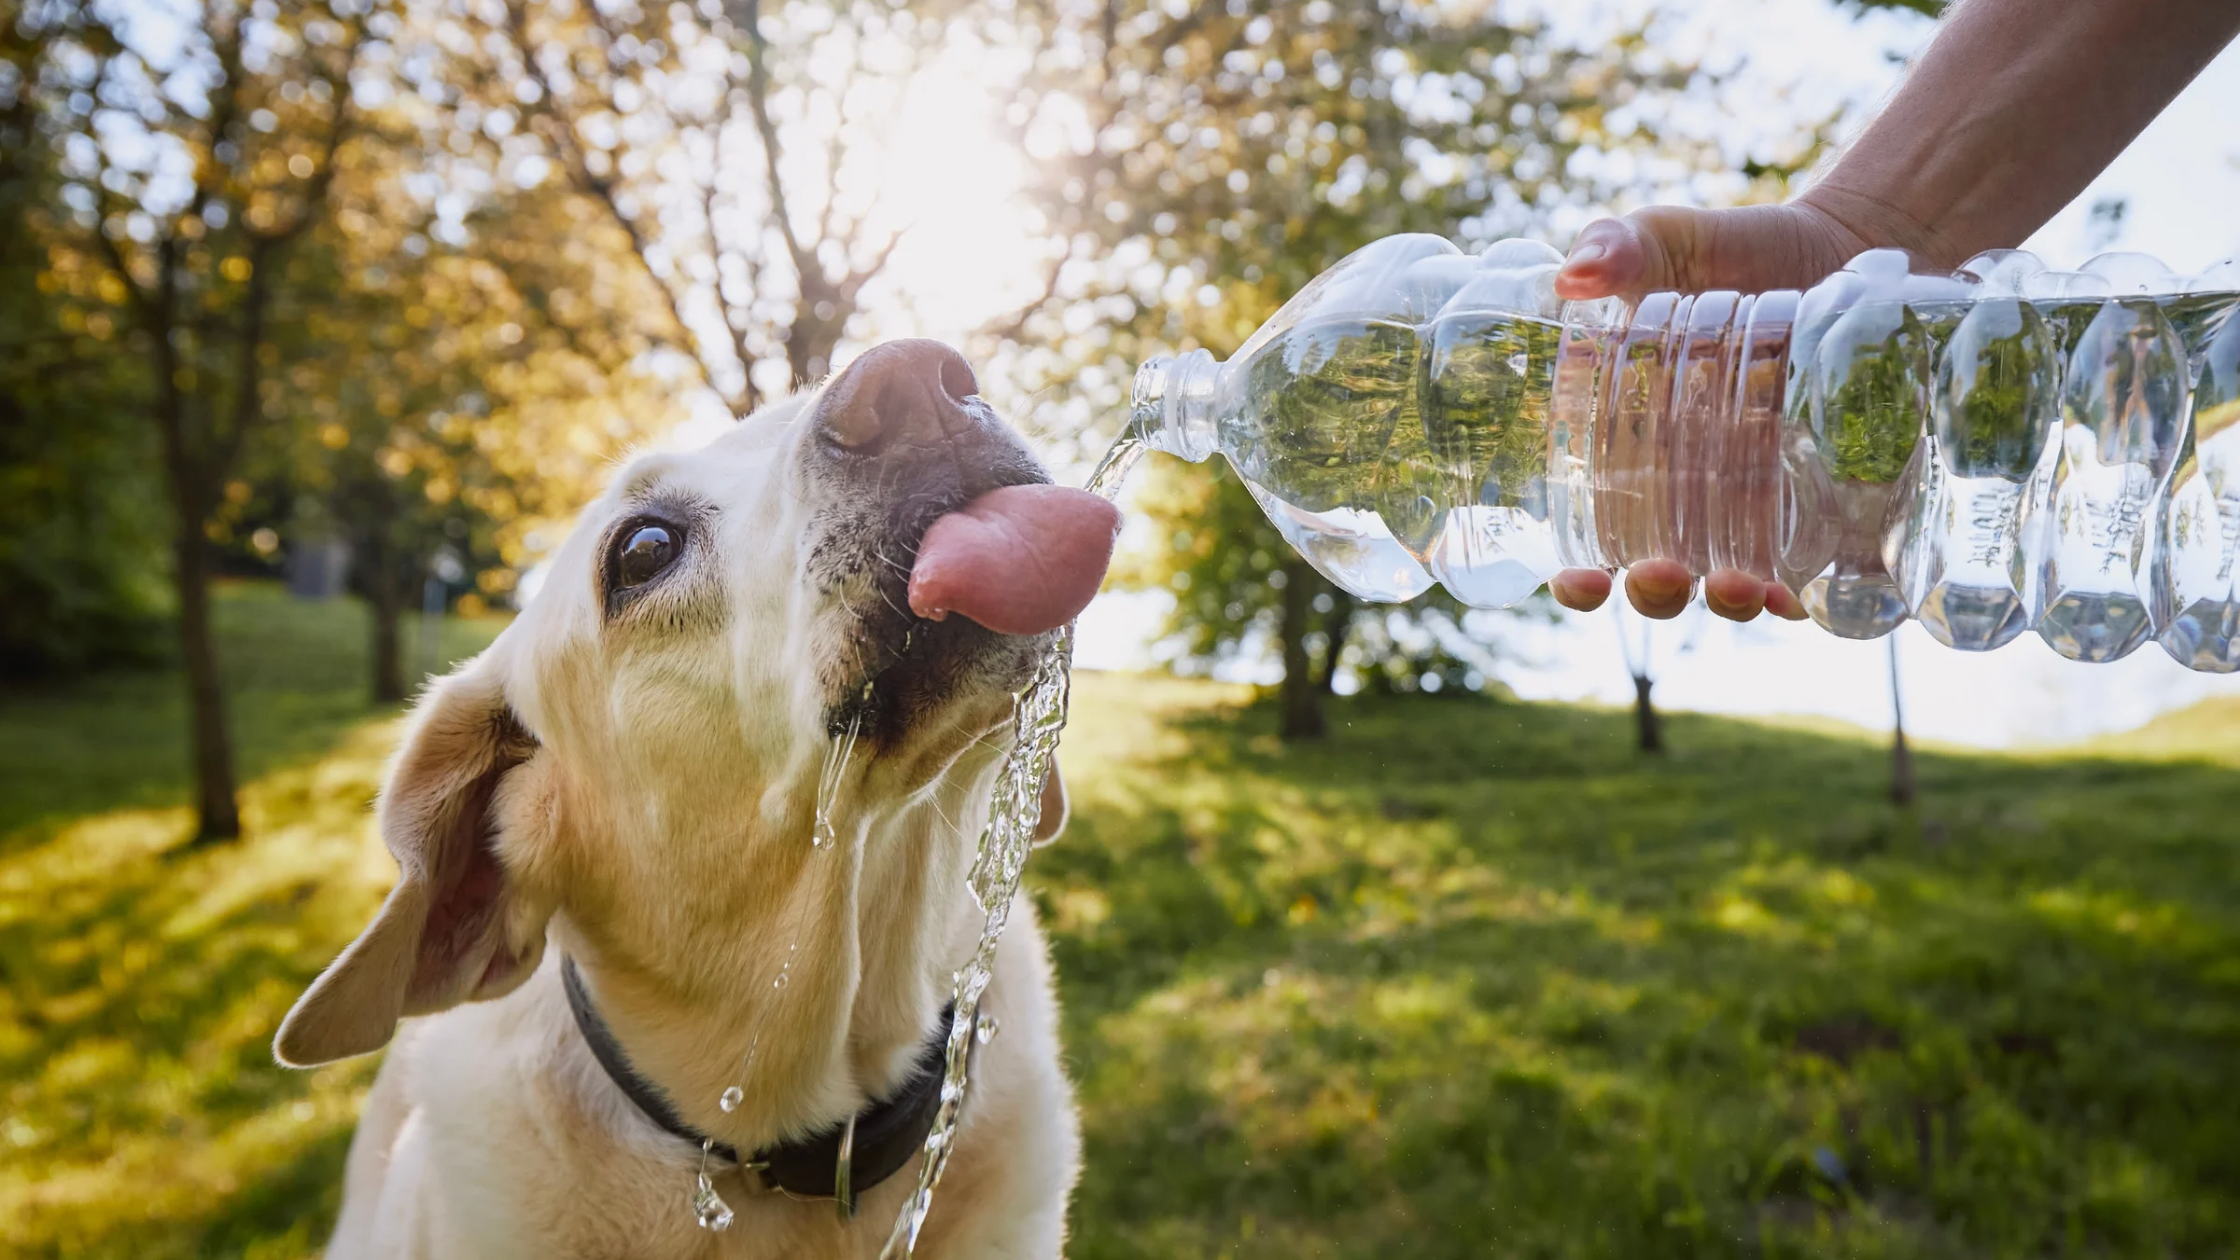 A playful dog happily drinks from a water bottle held by its owner, showcasing a fun way to keep your pup hydrated during hot summer days.